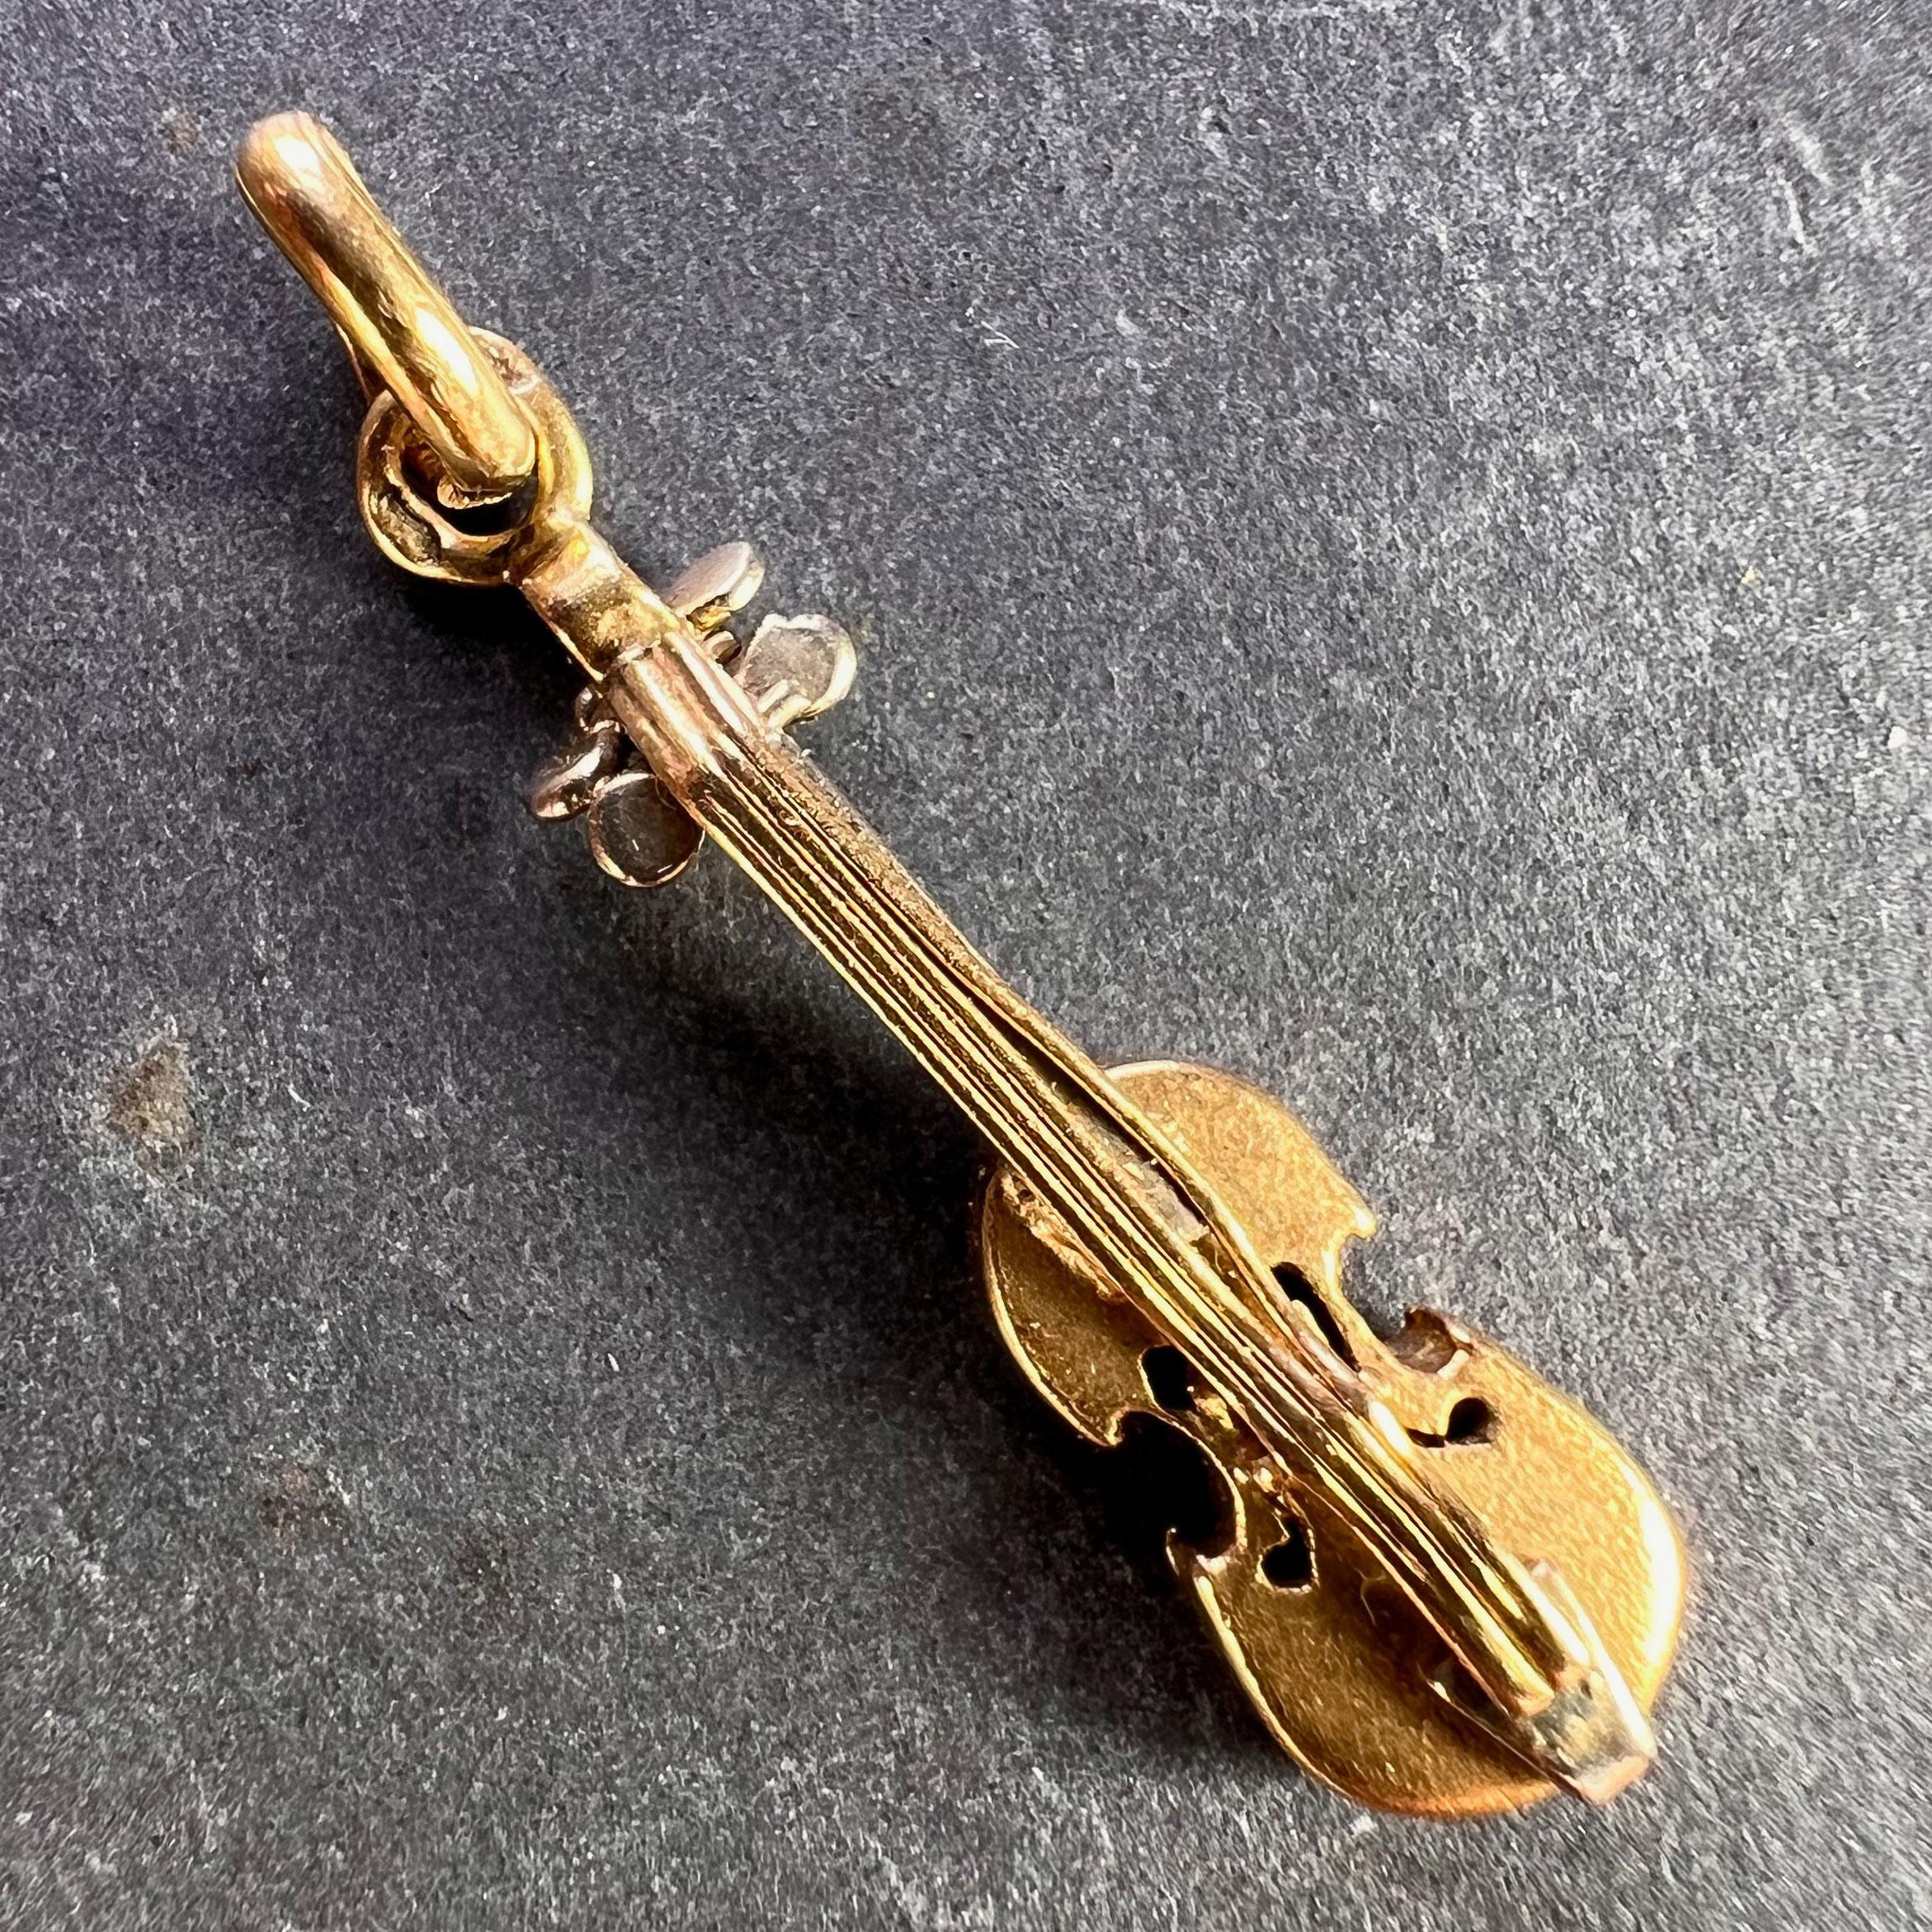 An 18 karat (18K) yellow gold charm pendant designed as a violin with white gold details. Stamped with the eagle's head for French manufacture and 18 karat gold along with an unknown maker's mark.
 
Dimensions: 2.4 x 0.5 x 0.35 cm
Weight: 1.67